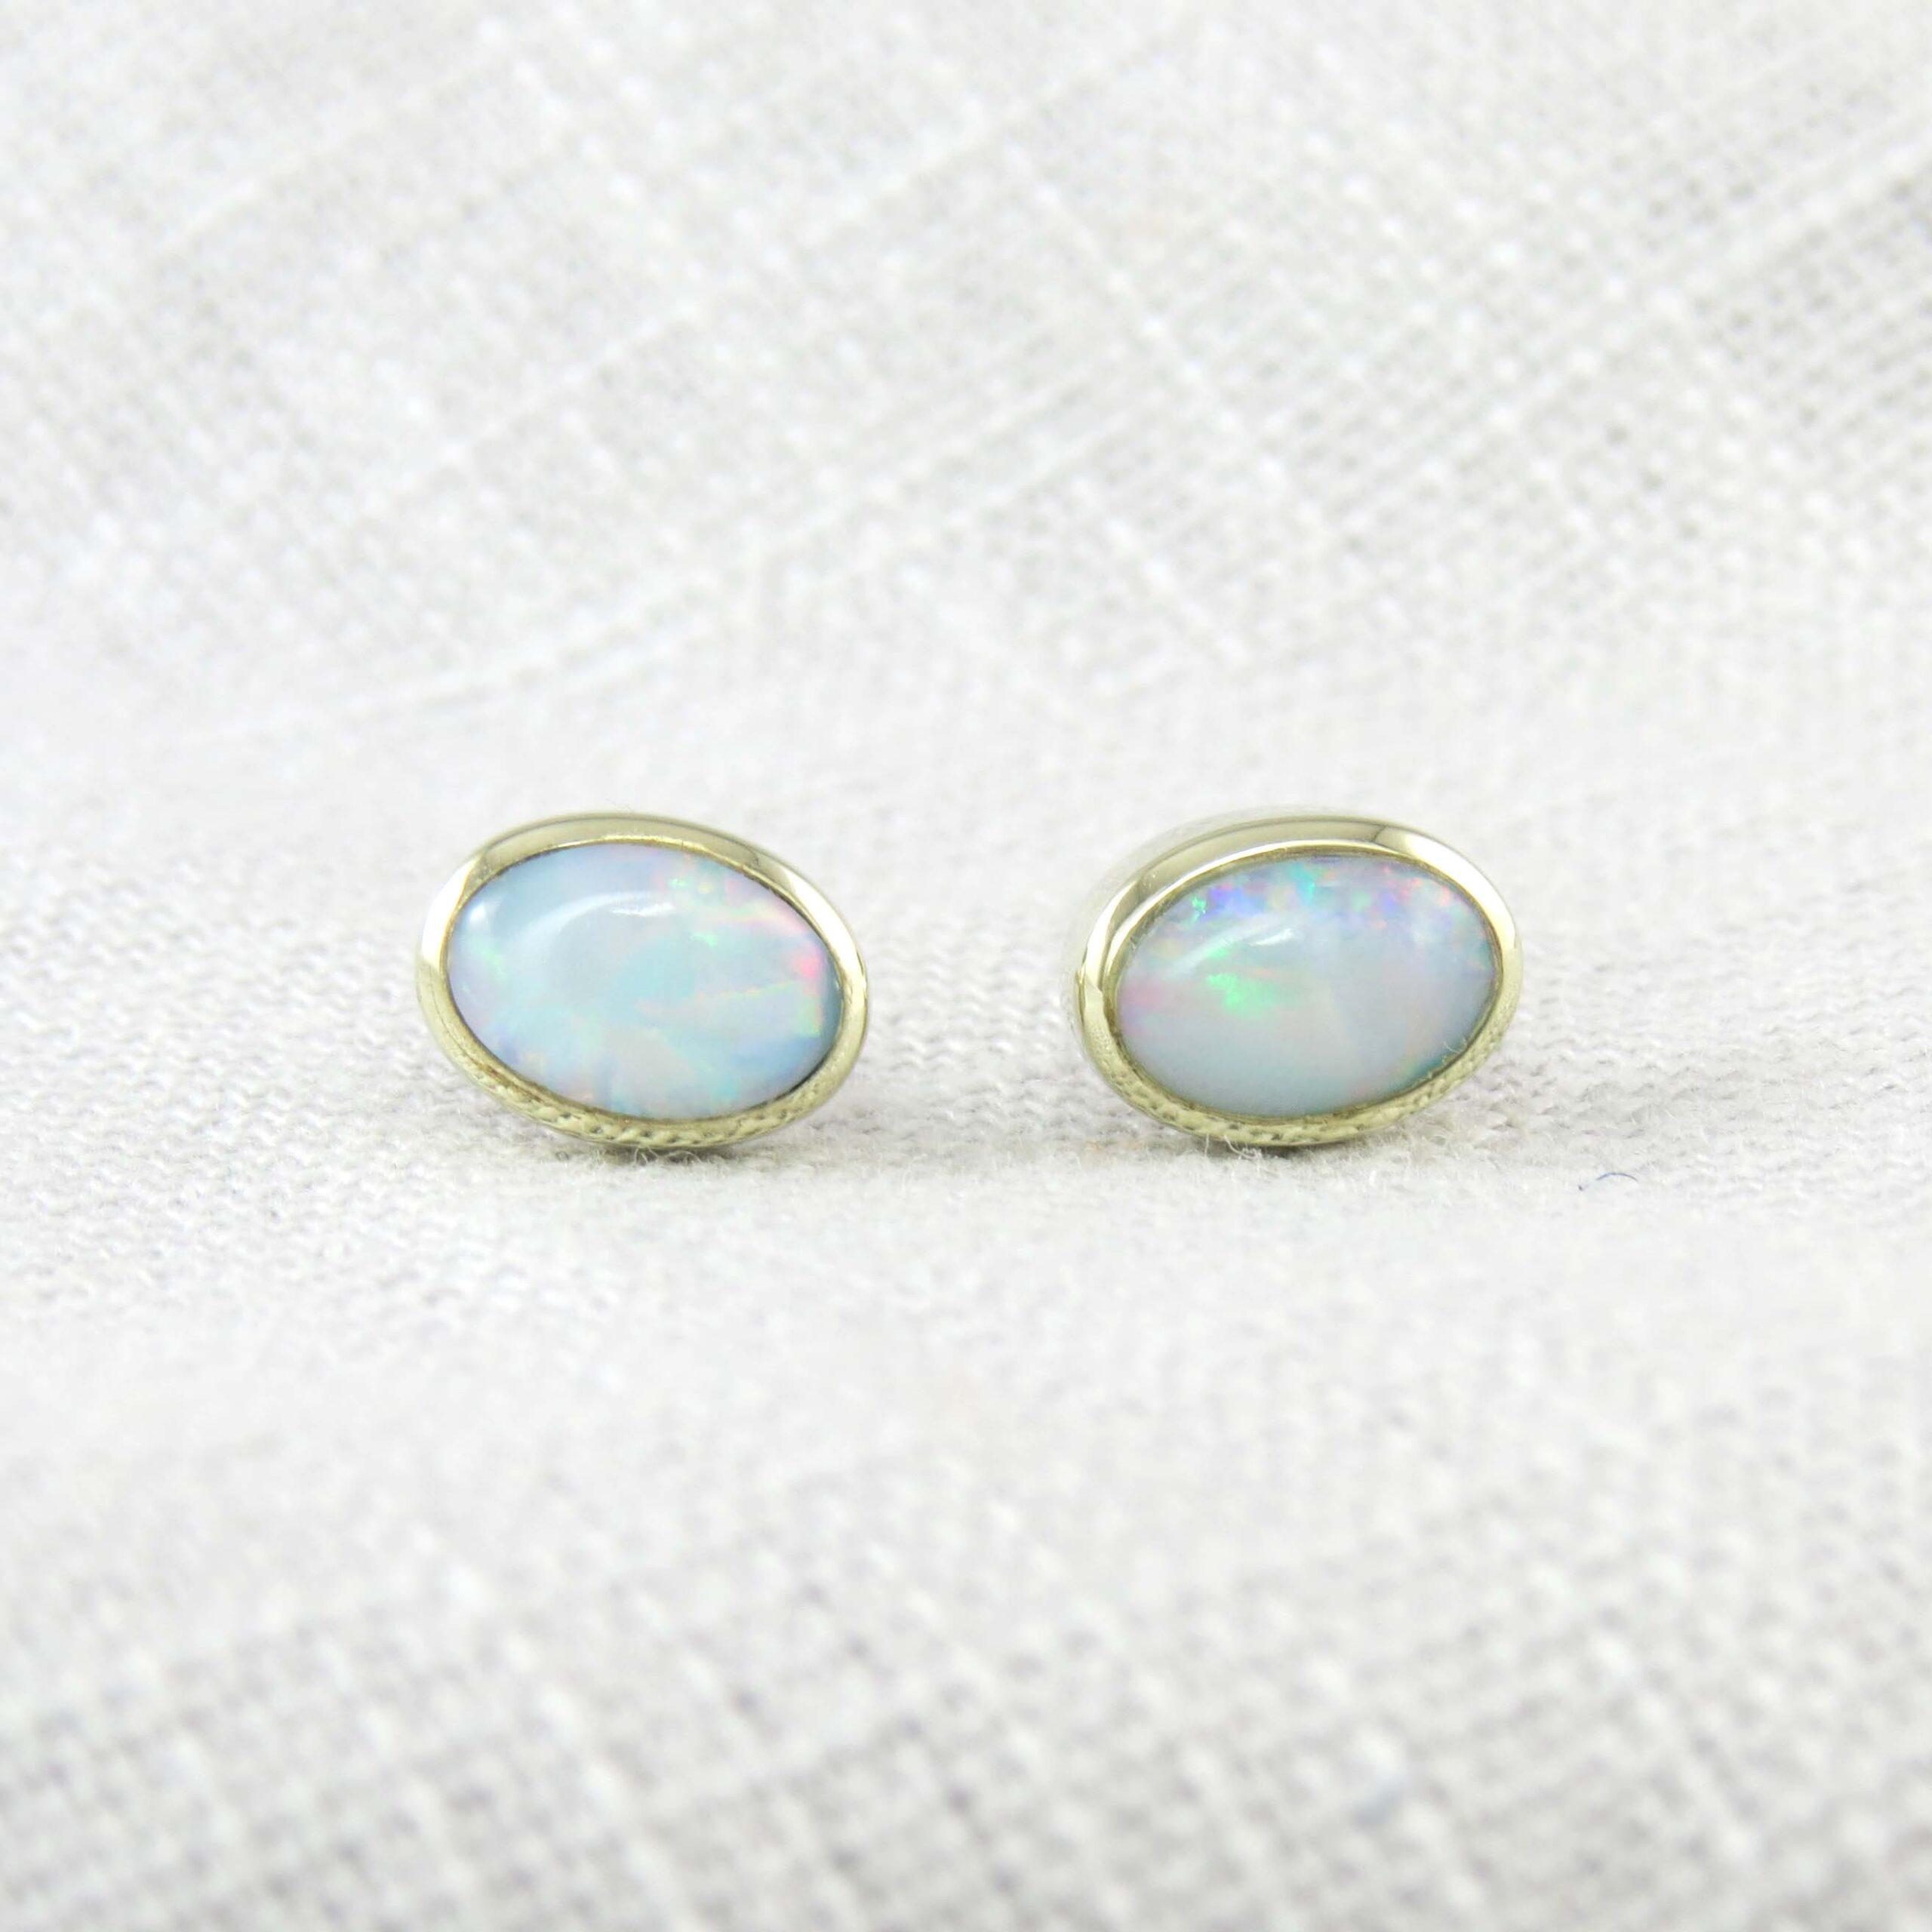 A pair of oval cabochon opals in a pale blue in colour with flashes of pink, green and yellow